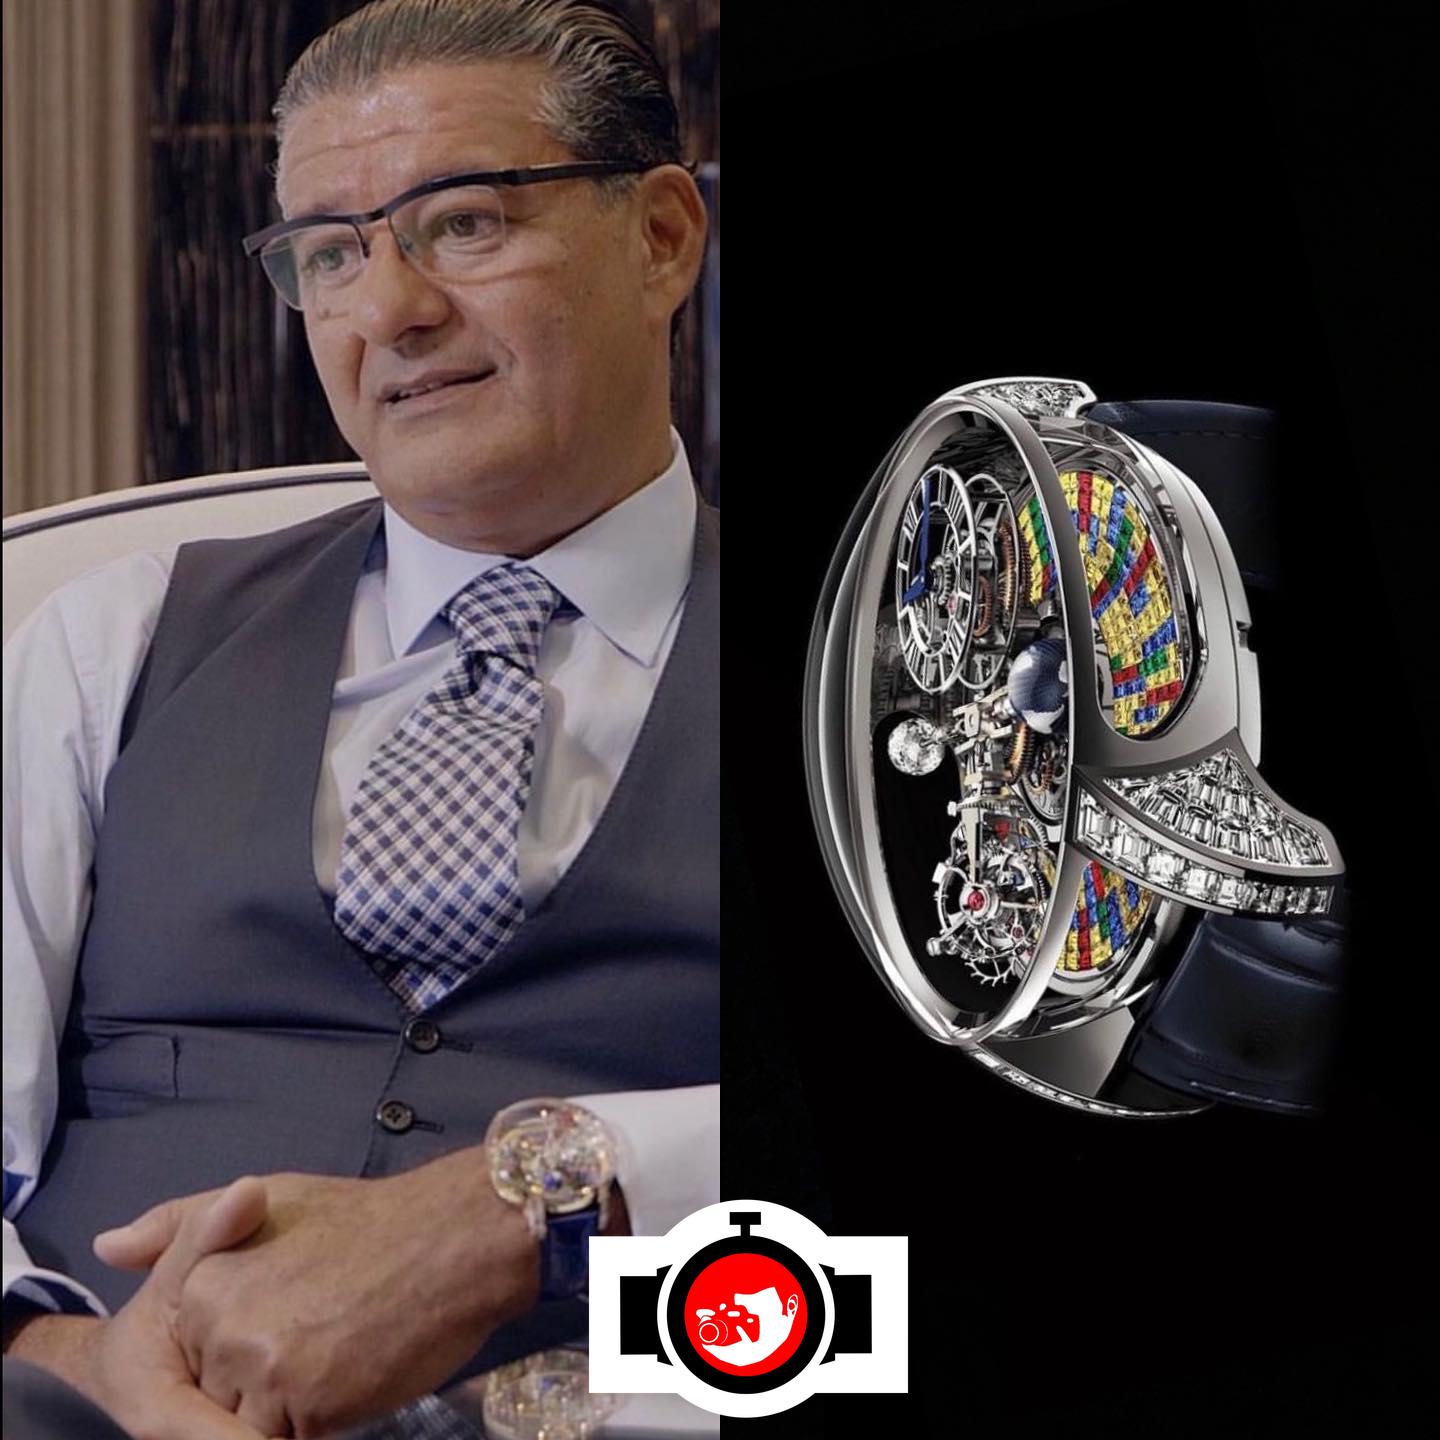 watchmaker Jacob Arabo spotted wearing a Jacob & Co 